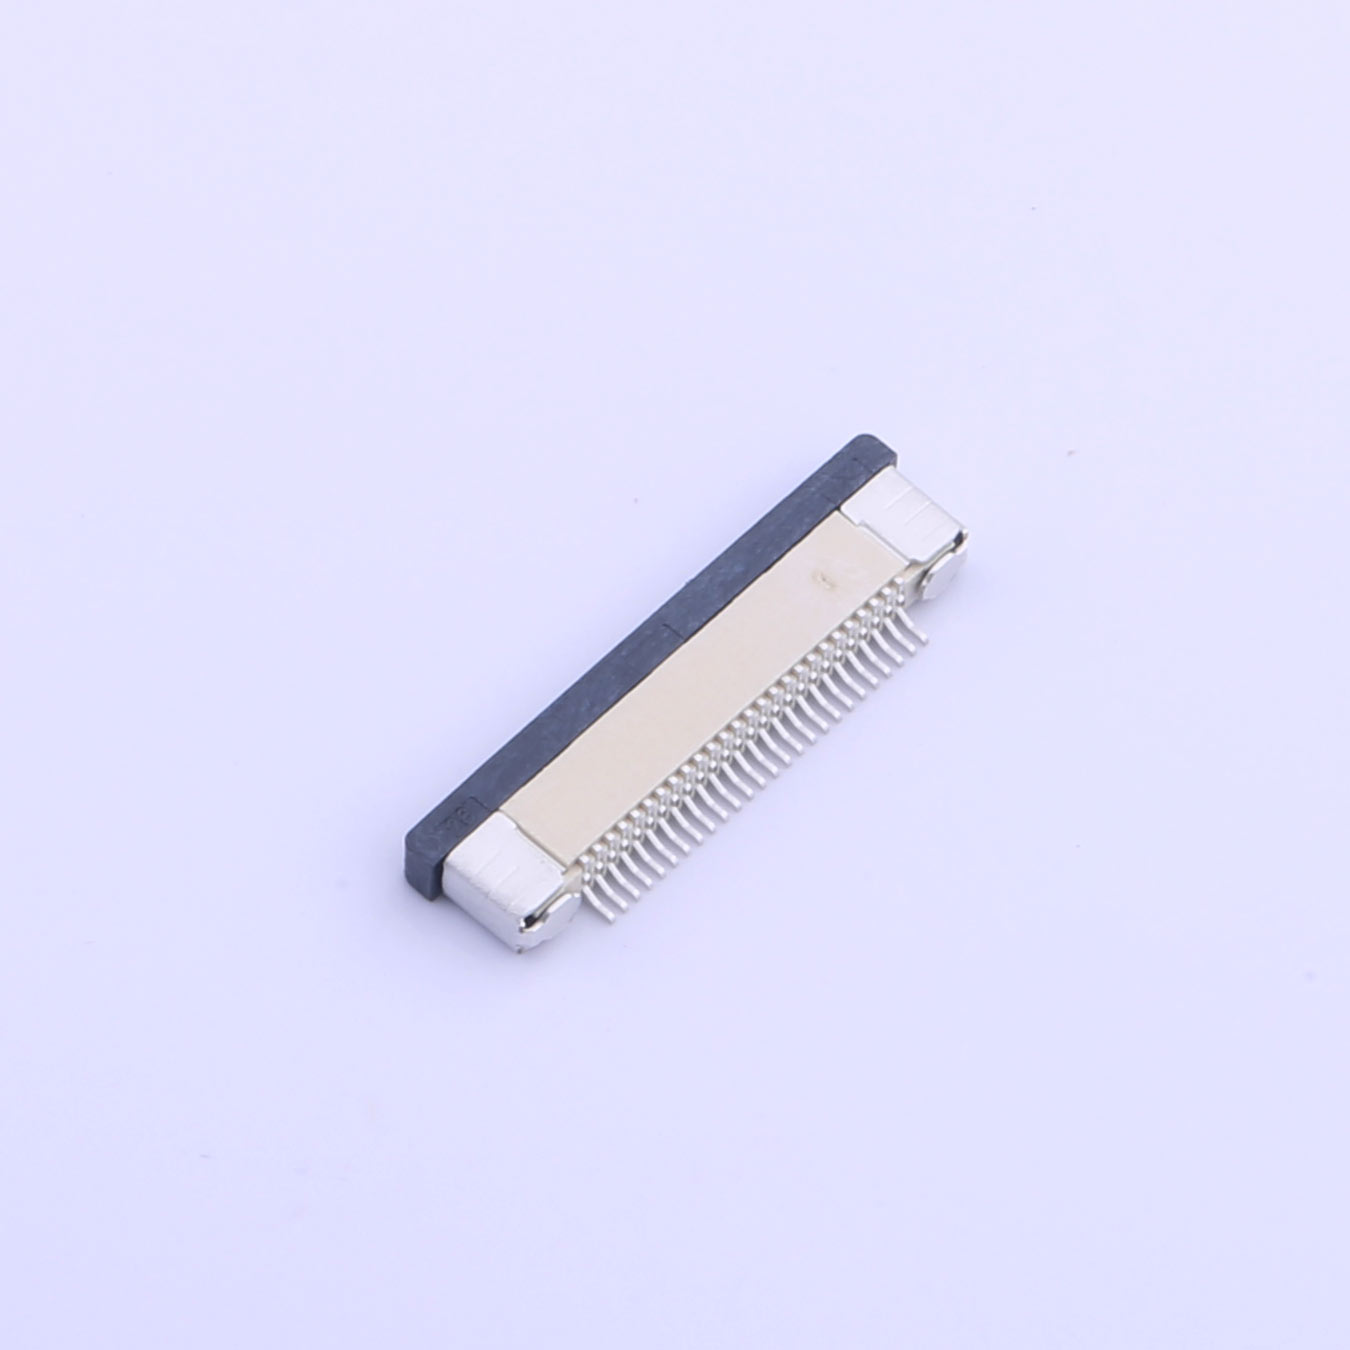 Kinghelm 0.5mm Pitch FPC FFC Connector 6P Height 3.25mm Front Flip Bottom Contact SMT FPC Connector